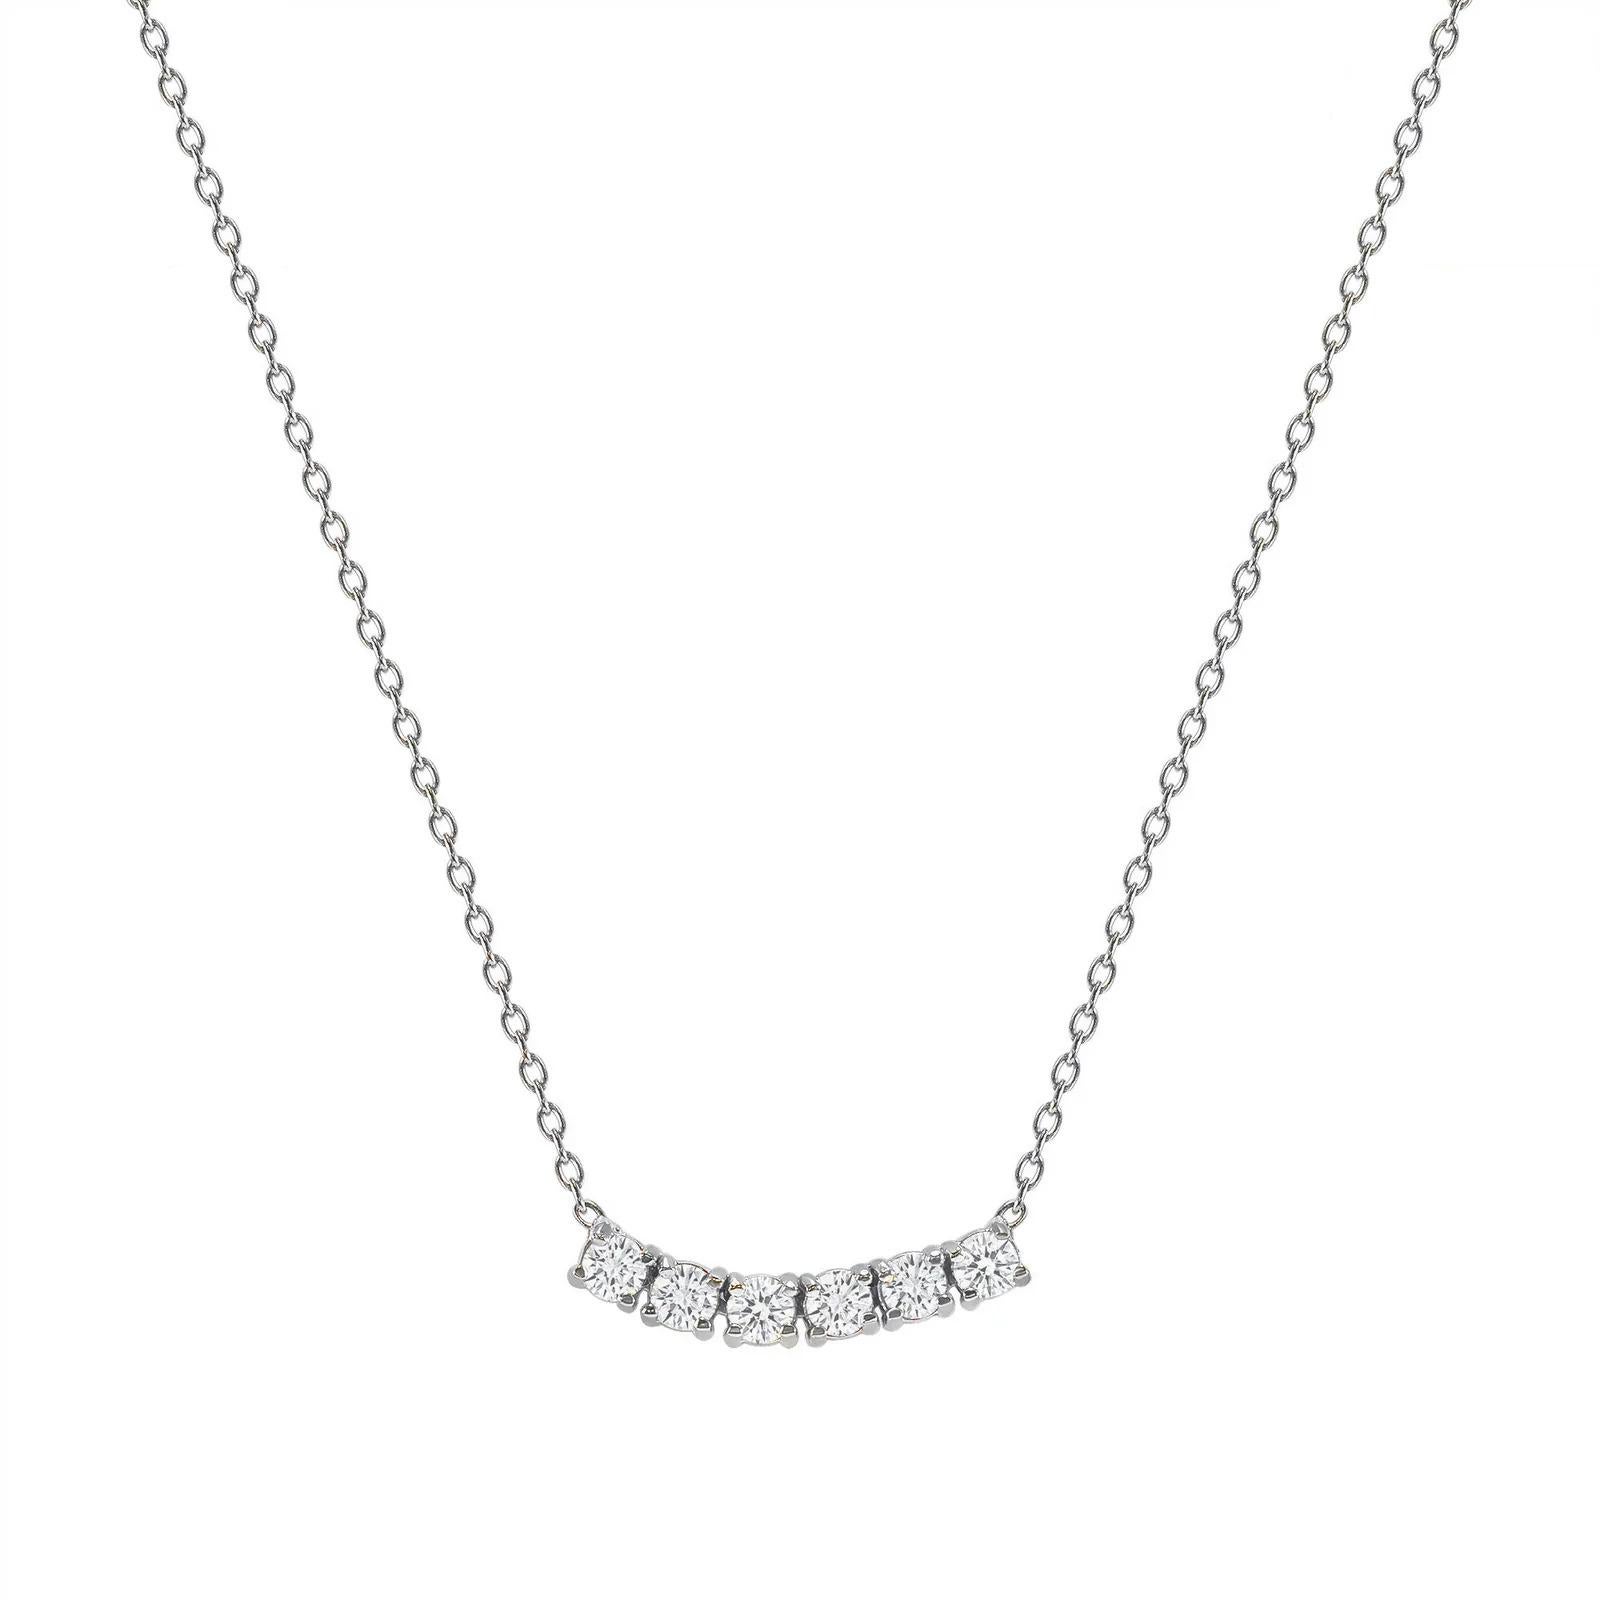 This petite, curved diamond necklace is crafted with gorgeous 14k gold set with six round diamonds.  

Gold: 14k 
Diamond Total Carats: 0.25ct
Diamond Cut: Round (6 diamonds)
Diamond Clarity: VS
Diamond Color: F
Color: White Gold
Necklace Length: 24